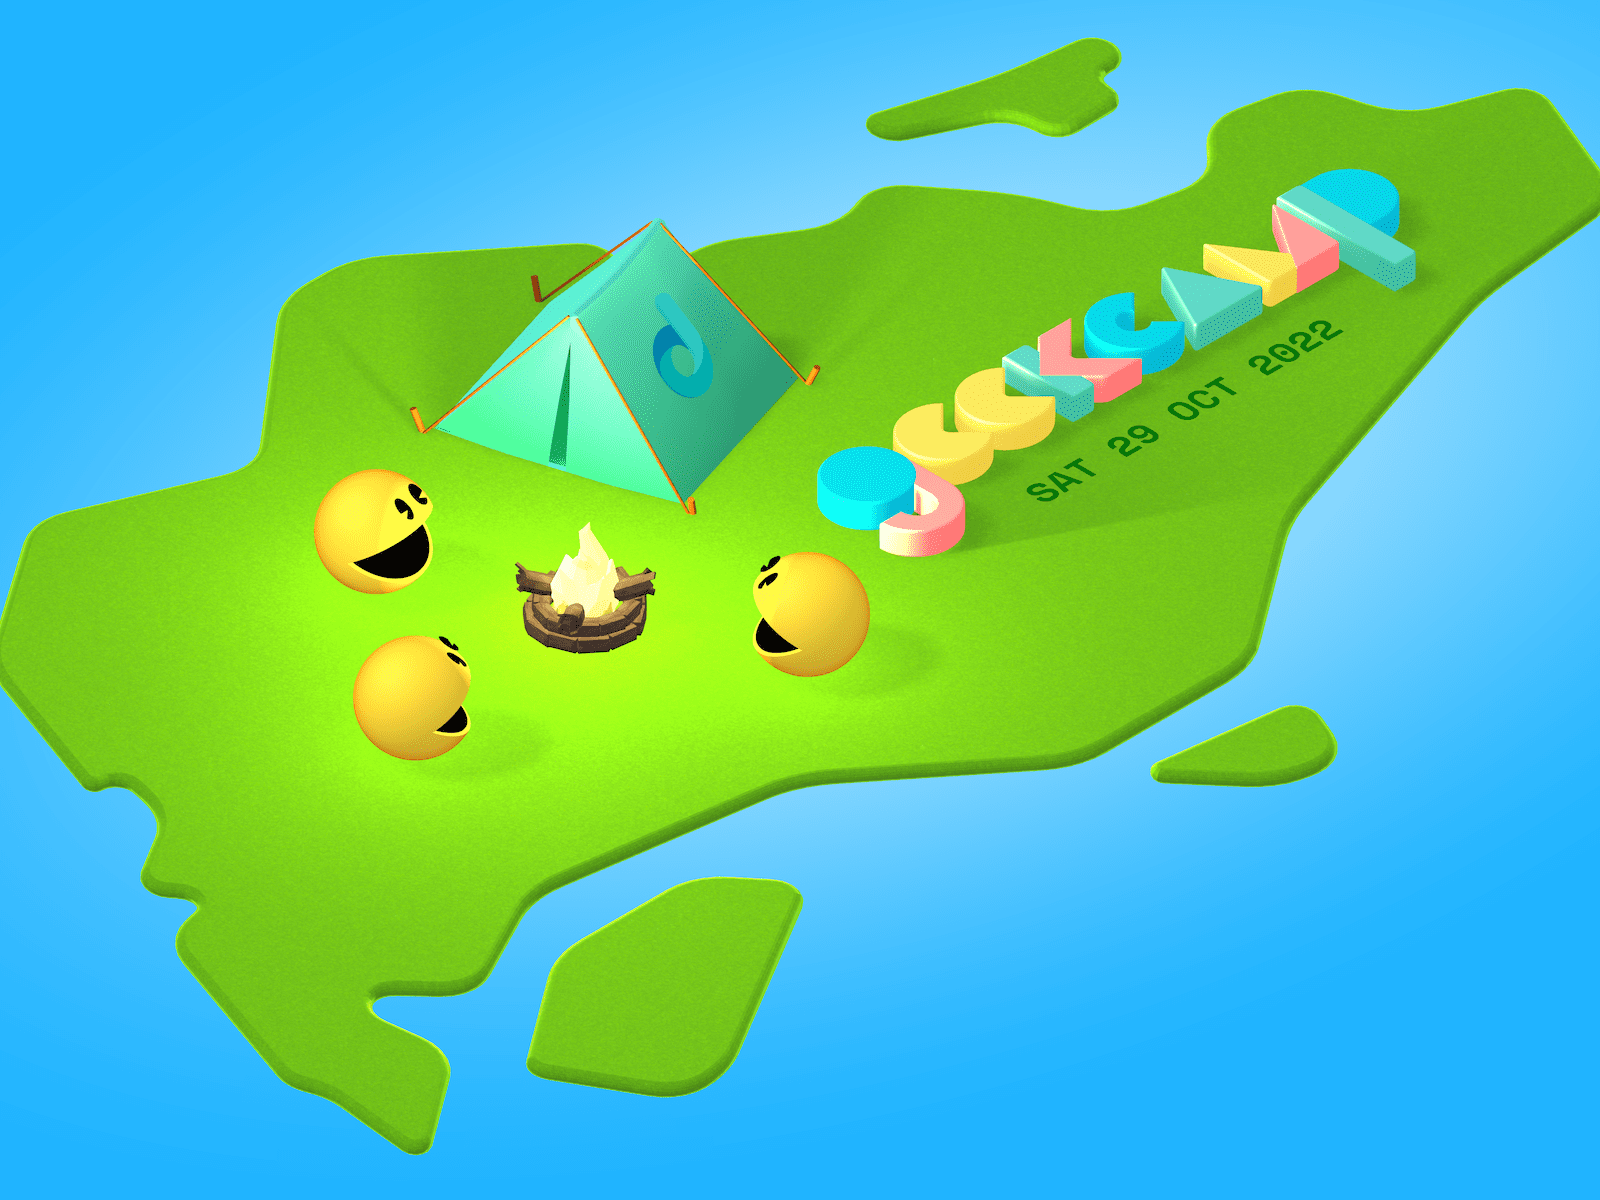 Geekcamp logo in 3D, with 3 Pac-Mans hanging out around a campfire, on Singapore island